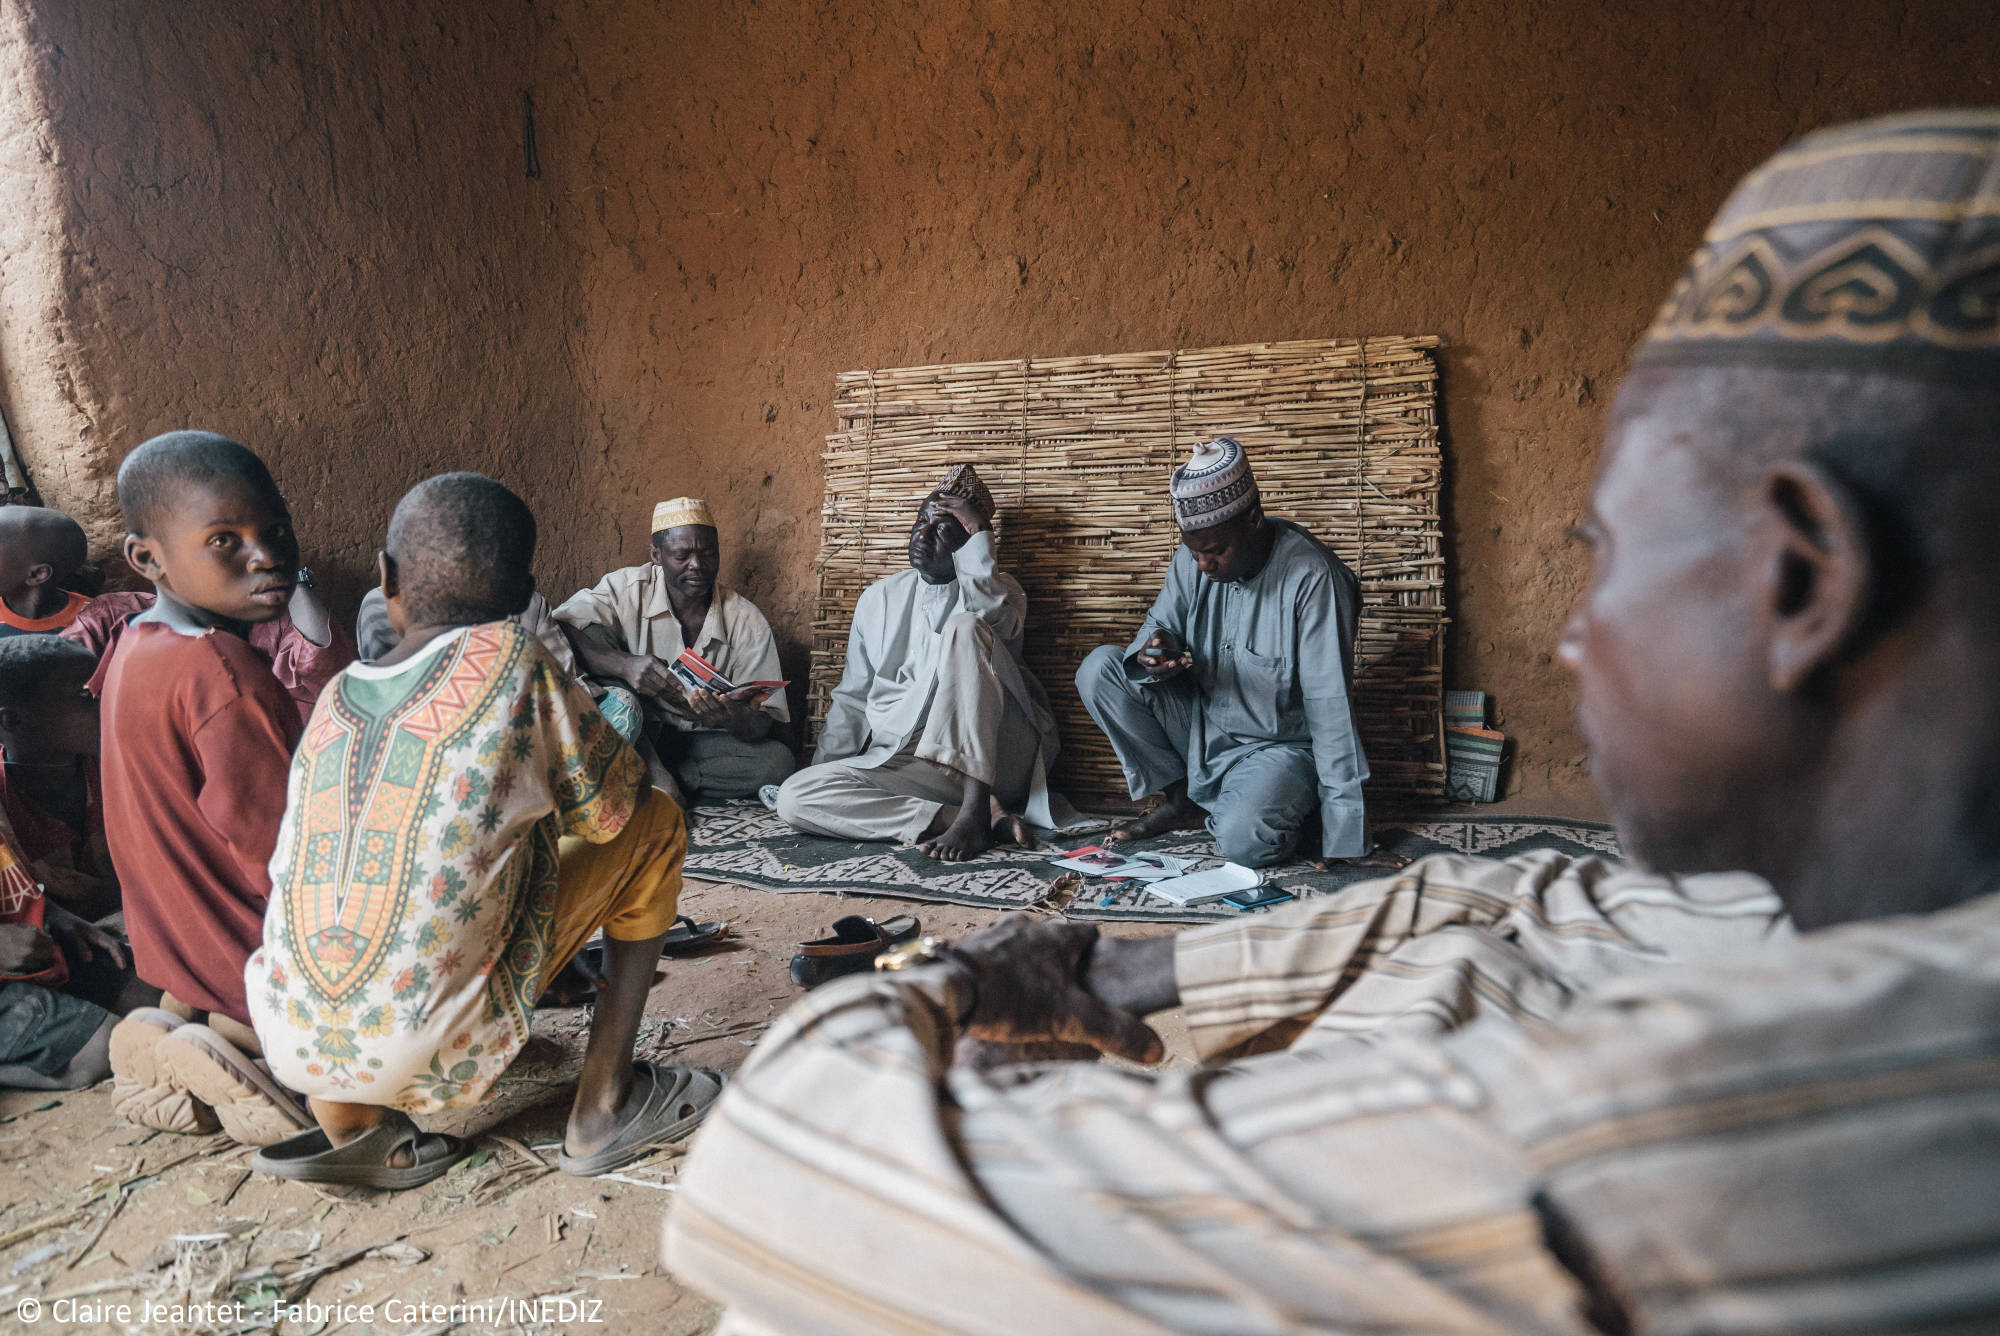 An outreach team from the Sokoto Noma Hospital, Nigeria, visits a village in the local government of Gwadabawa. Photo by Claire Jeantet - Fabrice Caterini/INEDIZ.